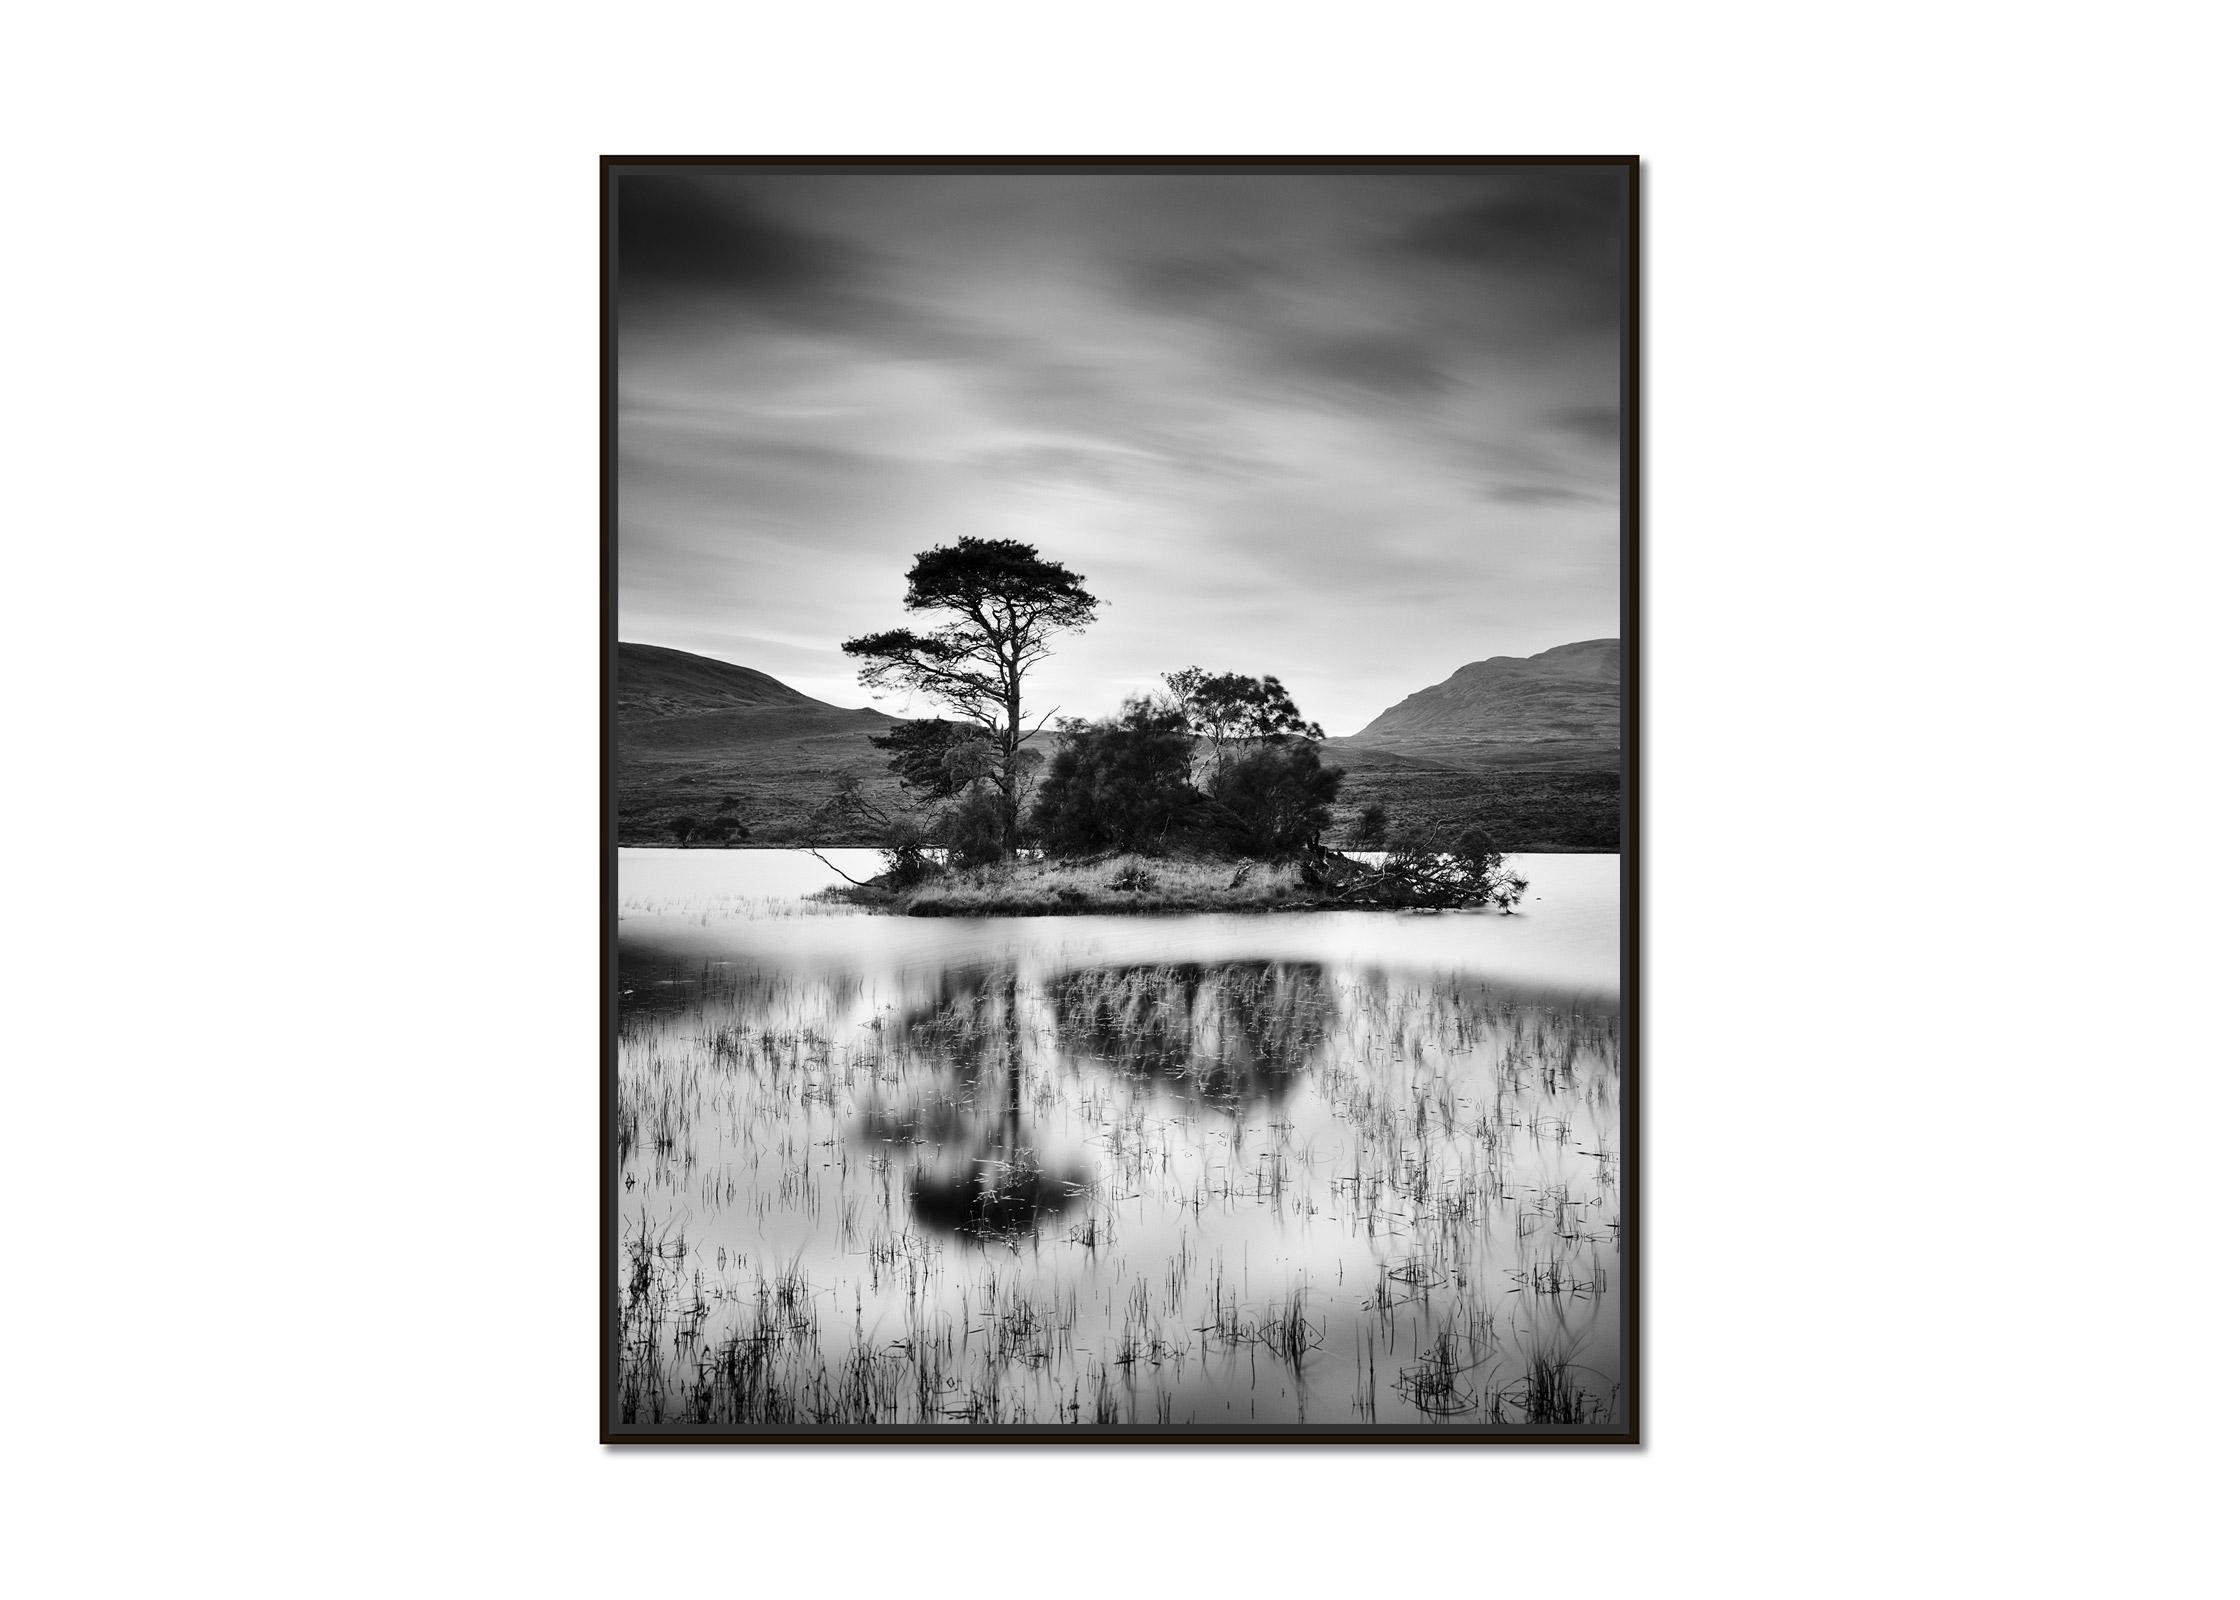 After the Sunset, Tree, Island, Scotland, black and white landscape photography - Photograph by Gerald Berghammer